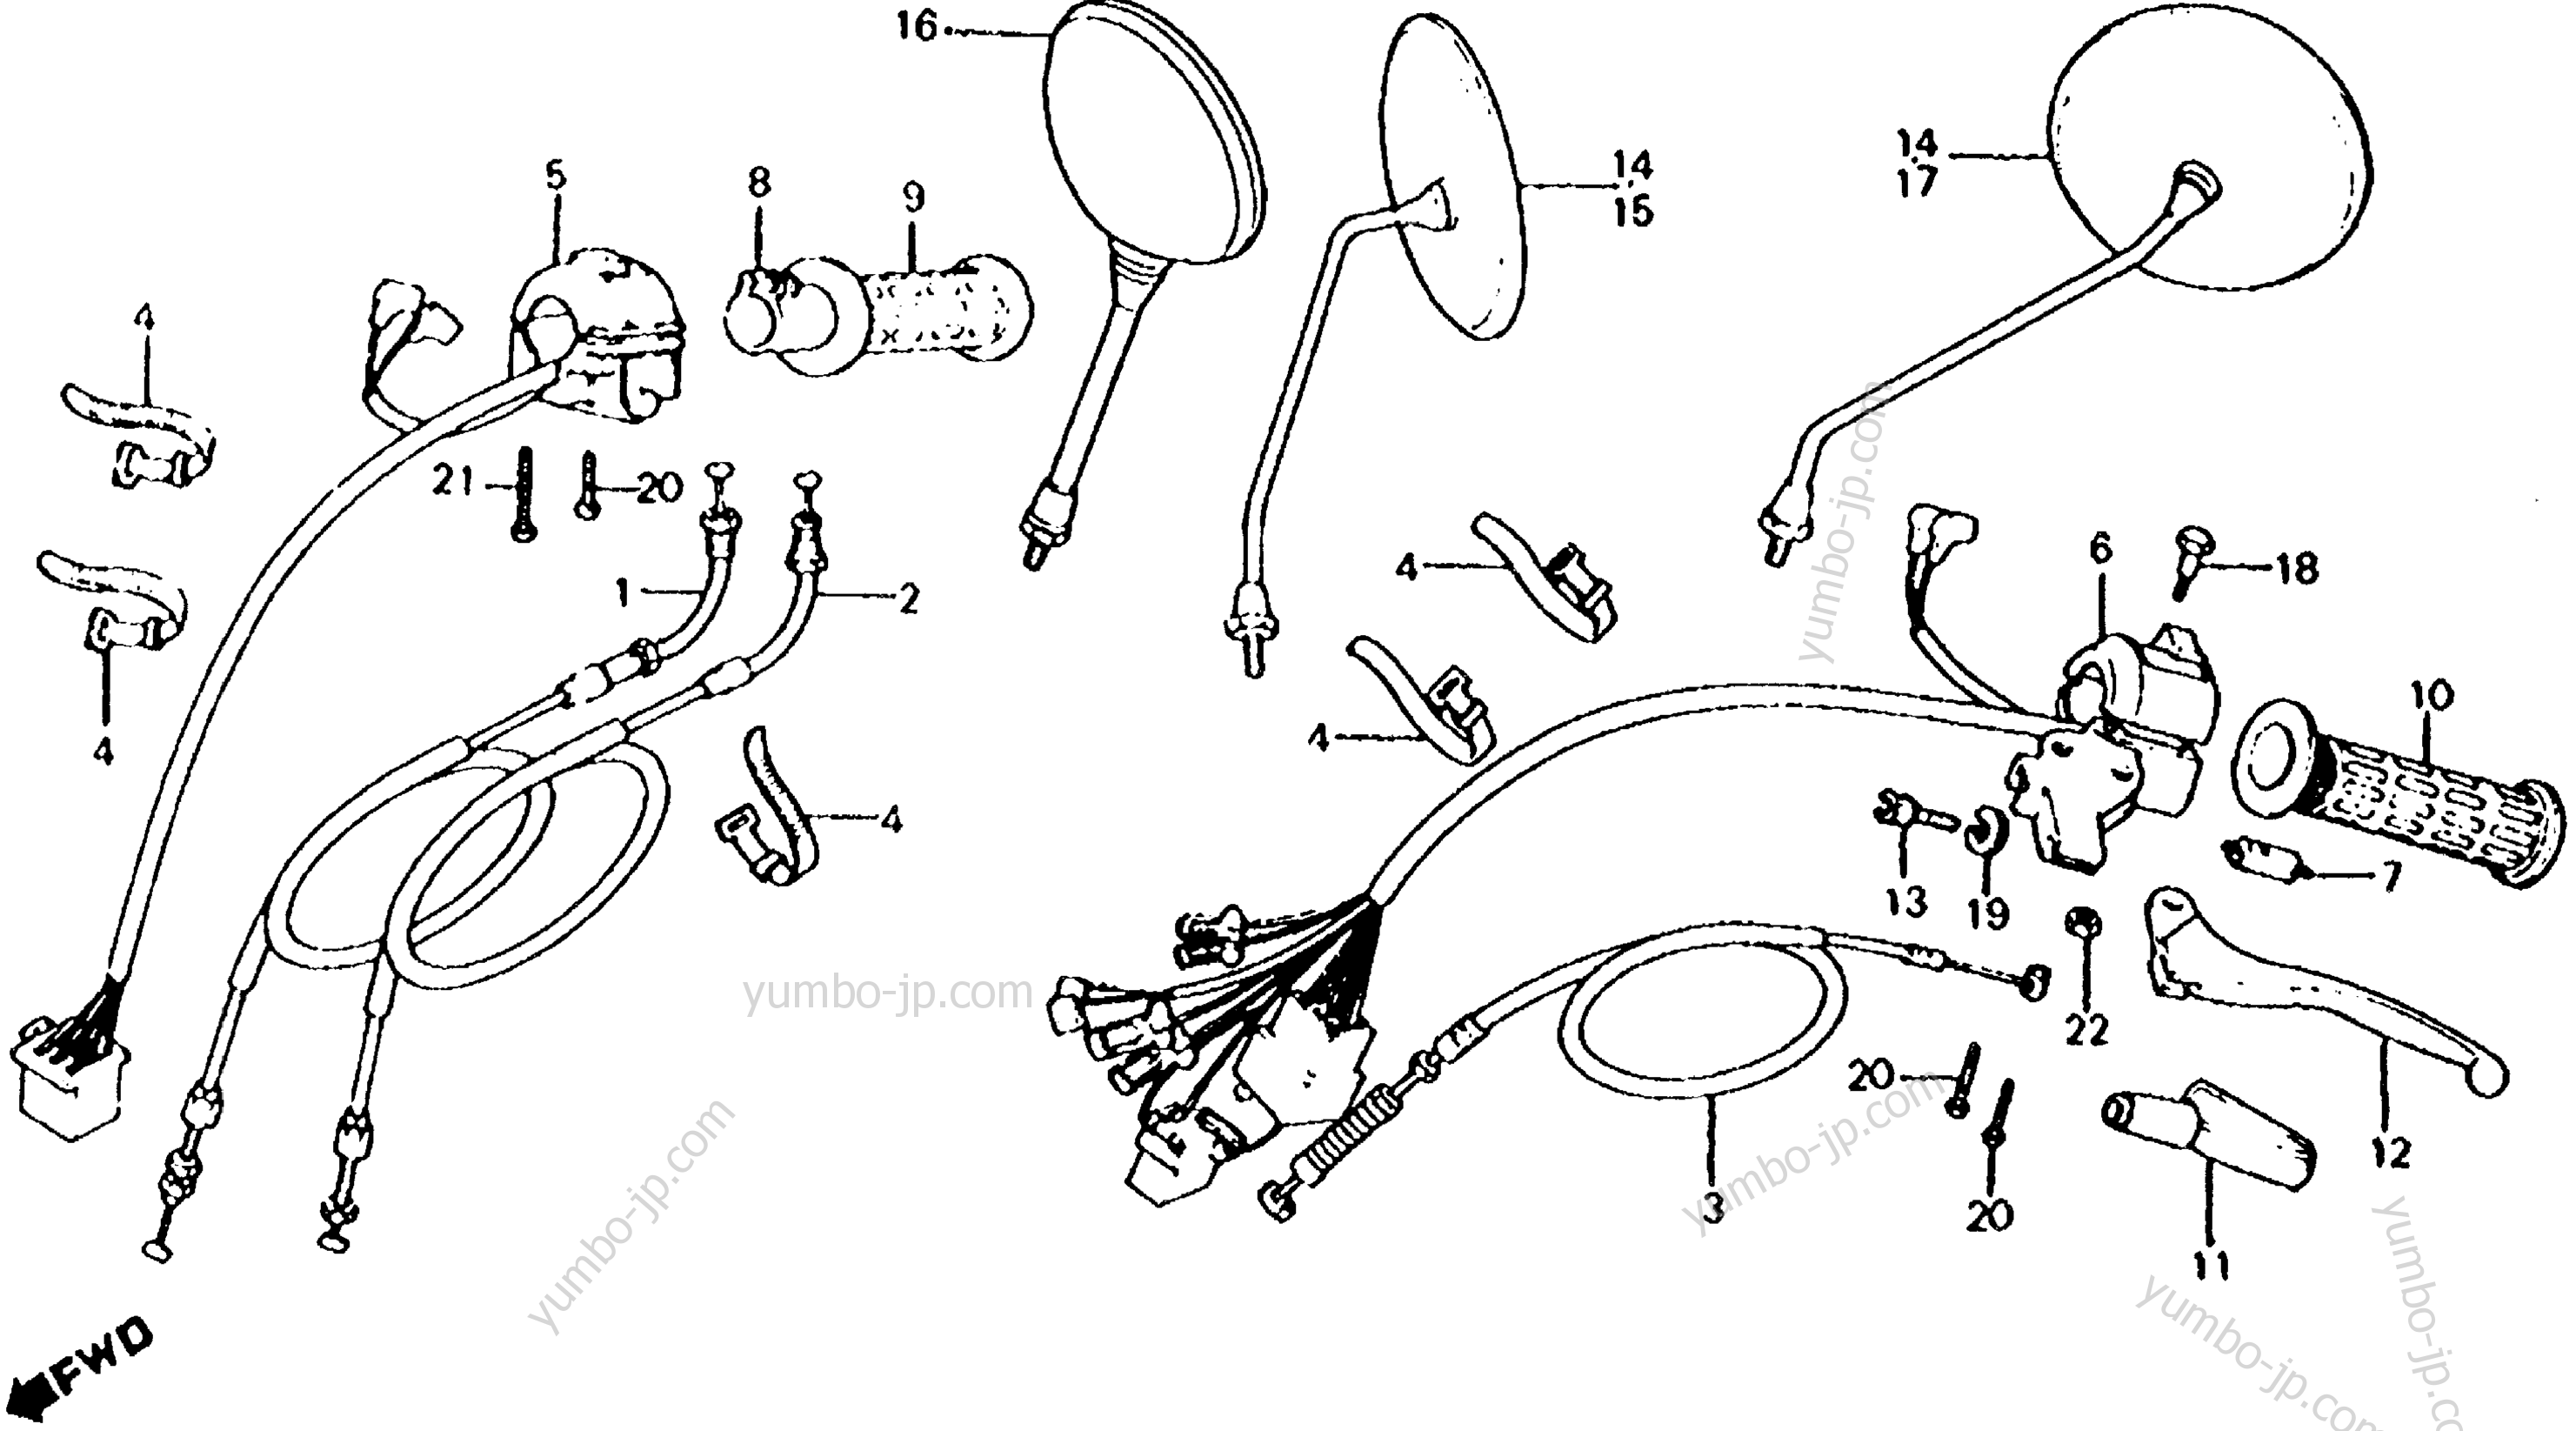 CABLES / SWITCHES / MIRROR for motorcycles HONDA CX500C A 1982 year